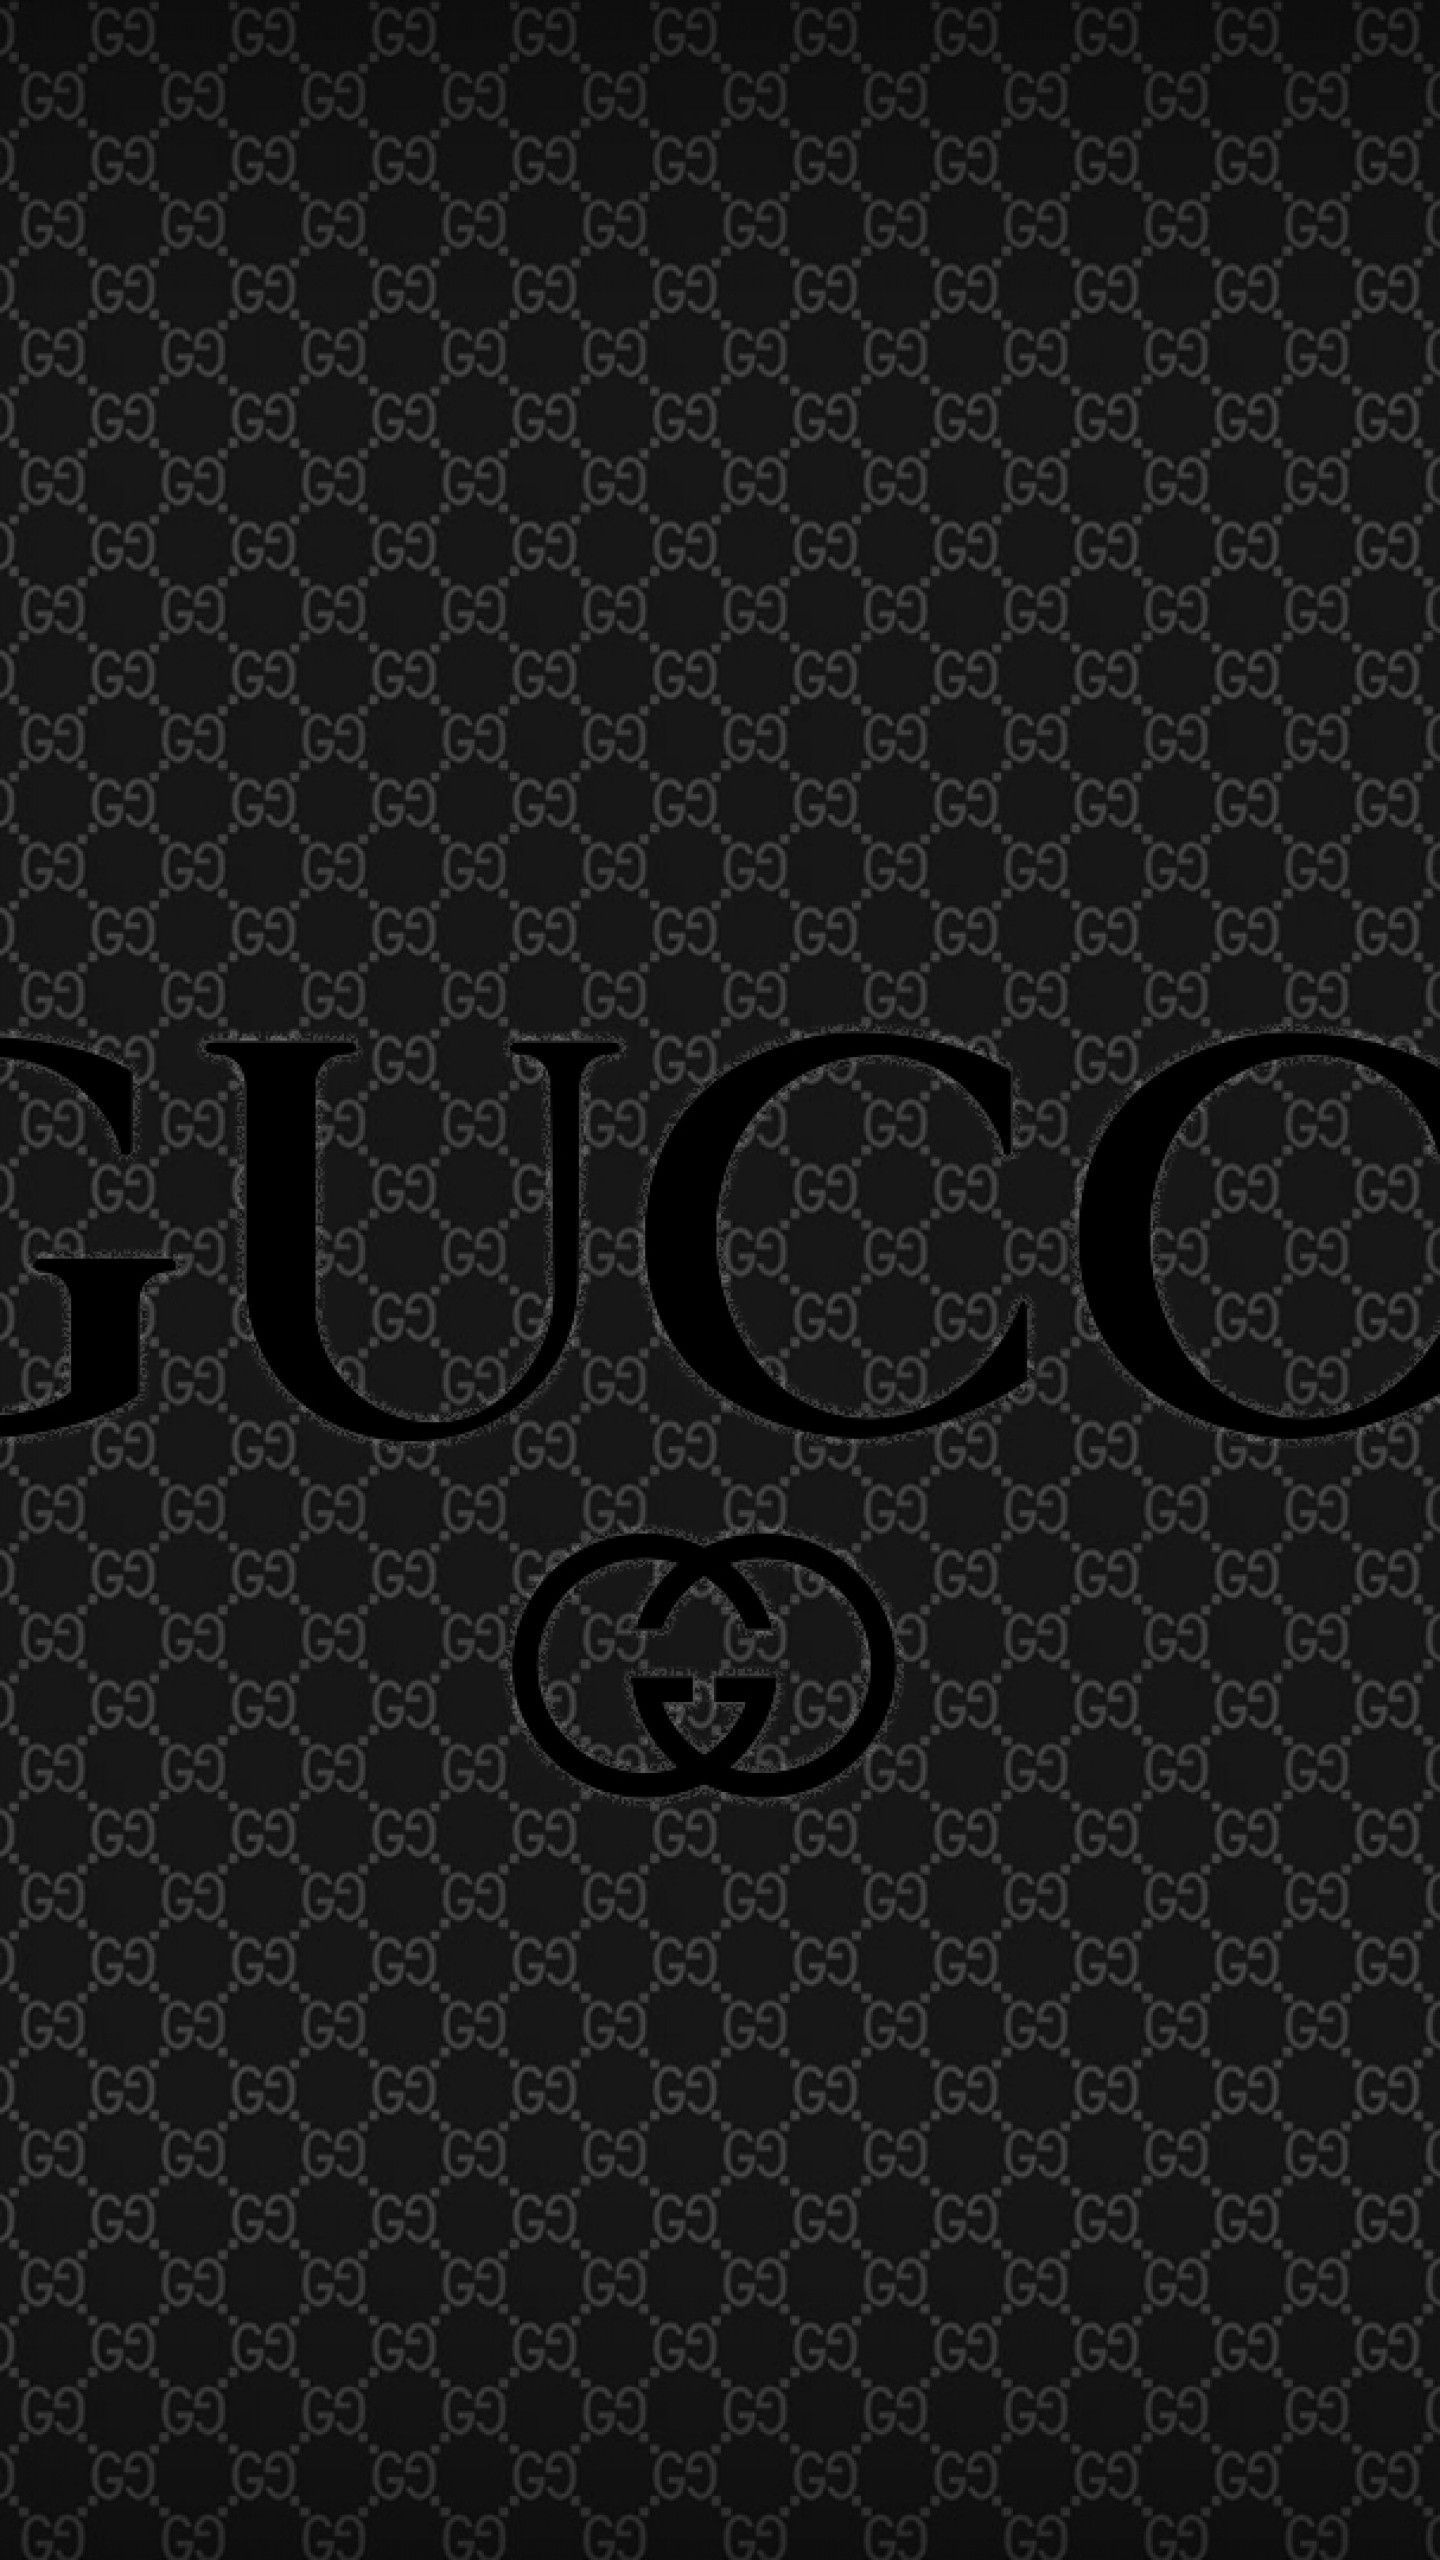 Gucci and Supreme Wallpapers - Top Free Gucci and Supreme Backgrounds -  WallpaperAccess